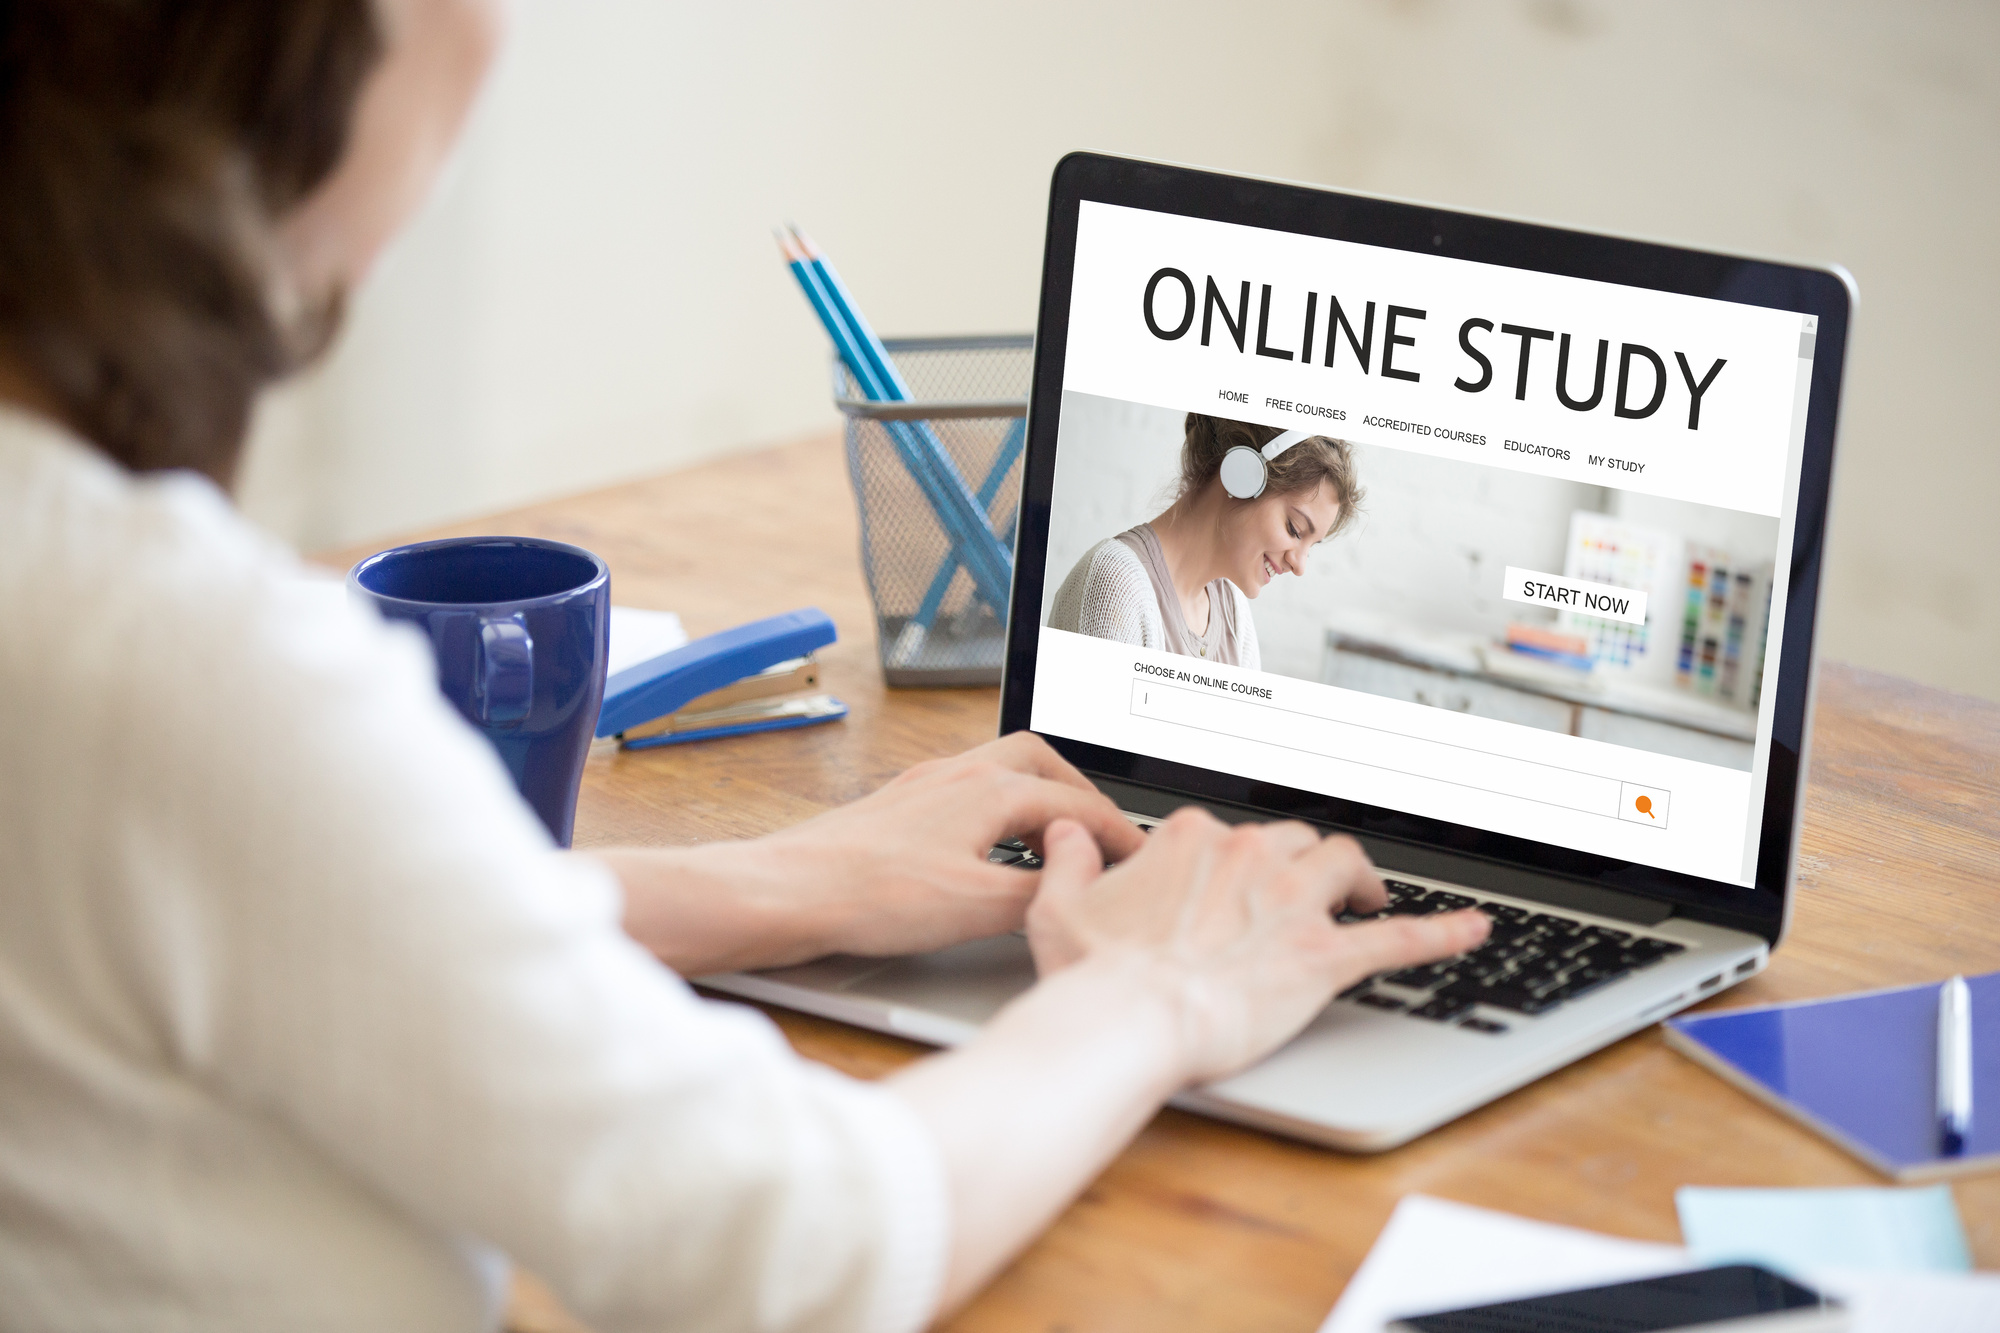 5 Reasons Why Online Learning is More Effective - Online Courses